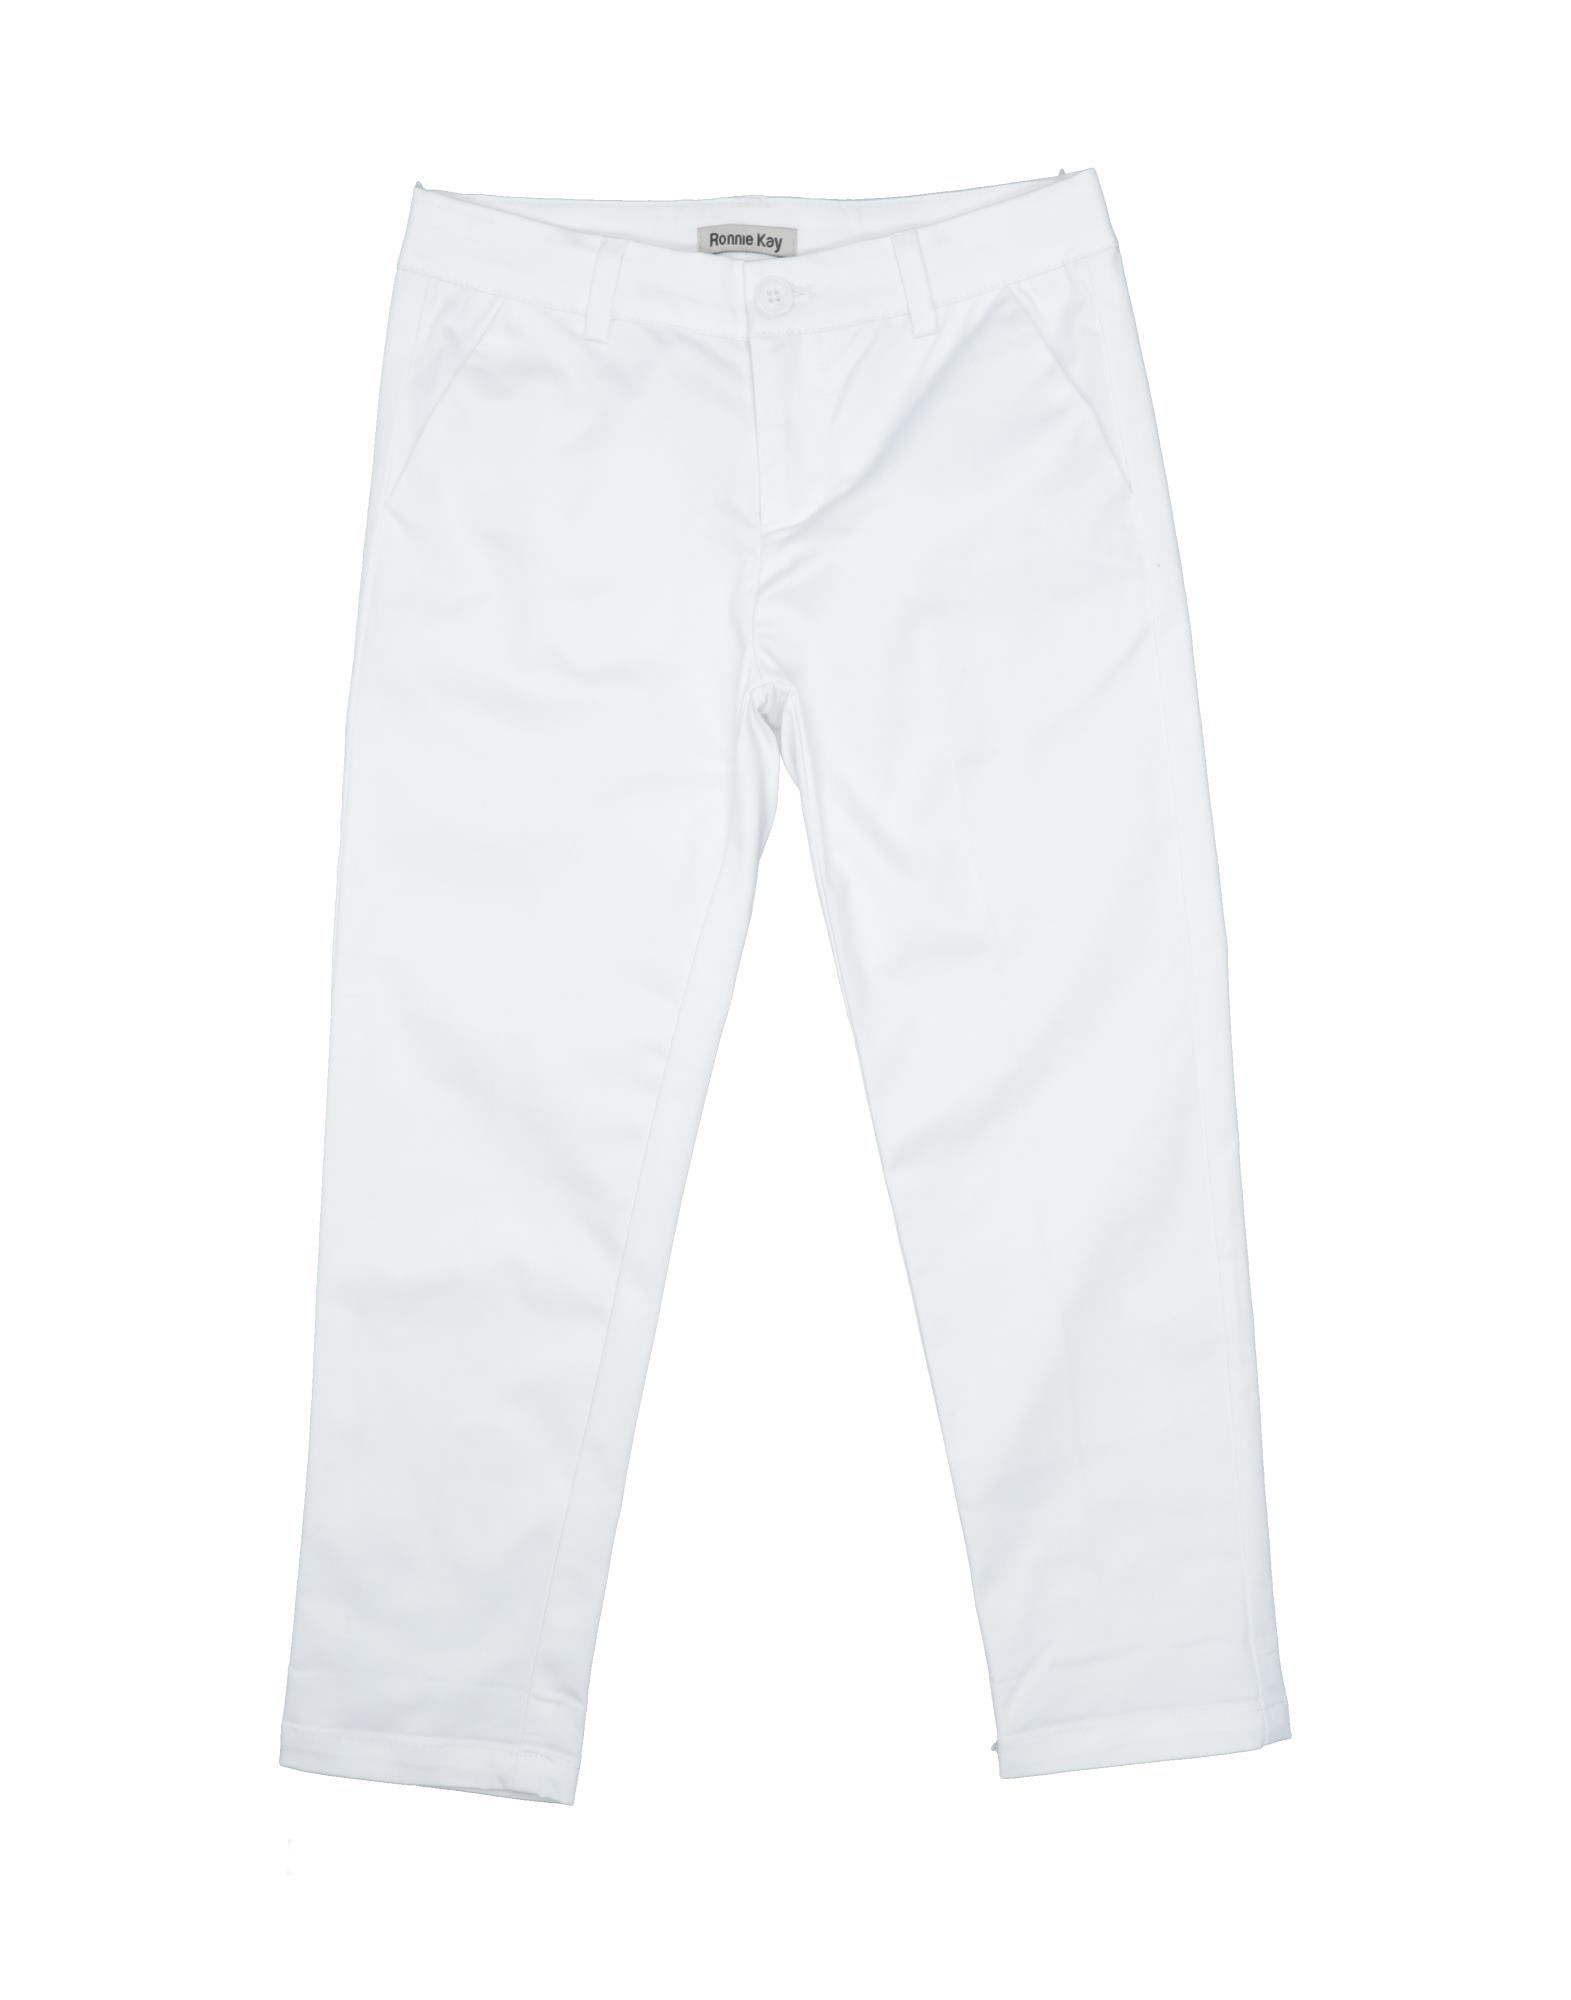 Ronnie Kay Kids' Casual Pants In White